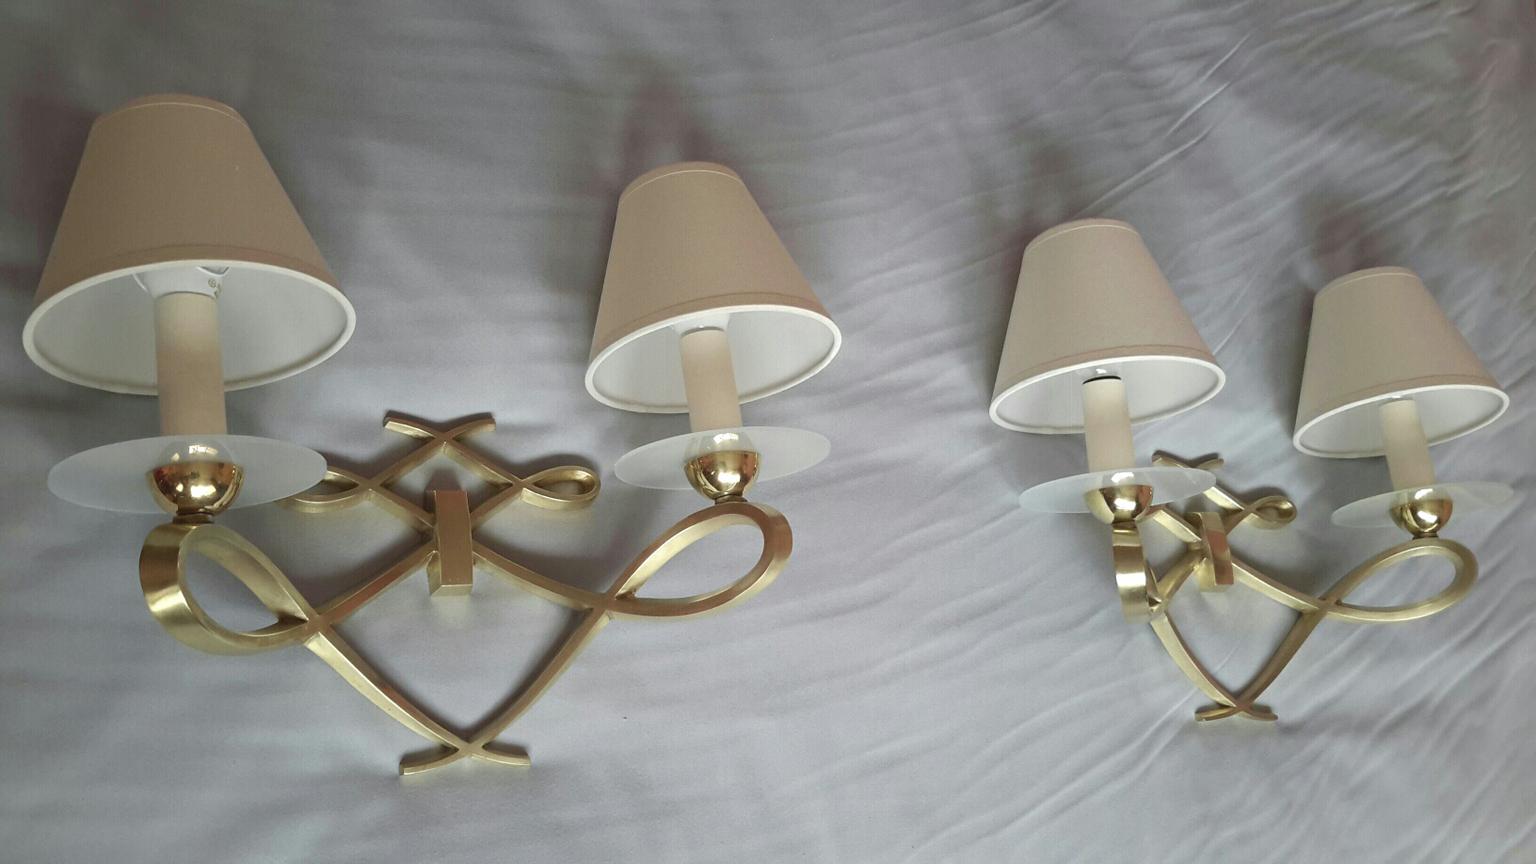 Pair of French Double Sconces Leleu Style by Arlus, France, 1950 For Sale 1